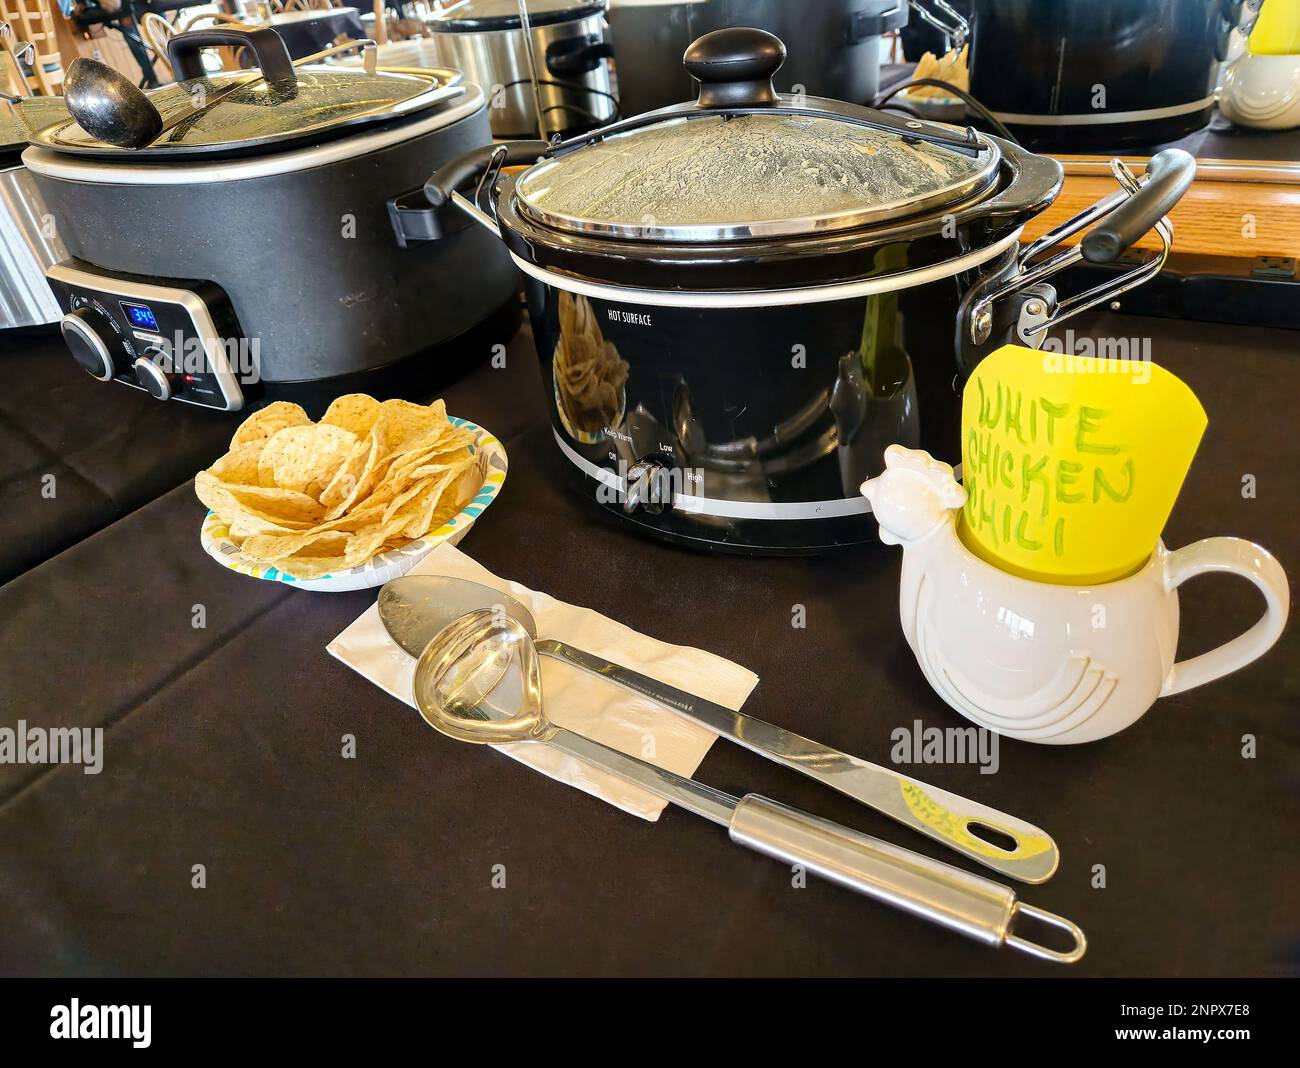 Row of crockpots with chips and cutlery for a chili cook-off contest Stock Photo